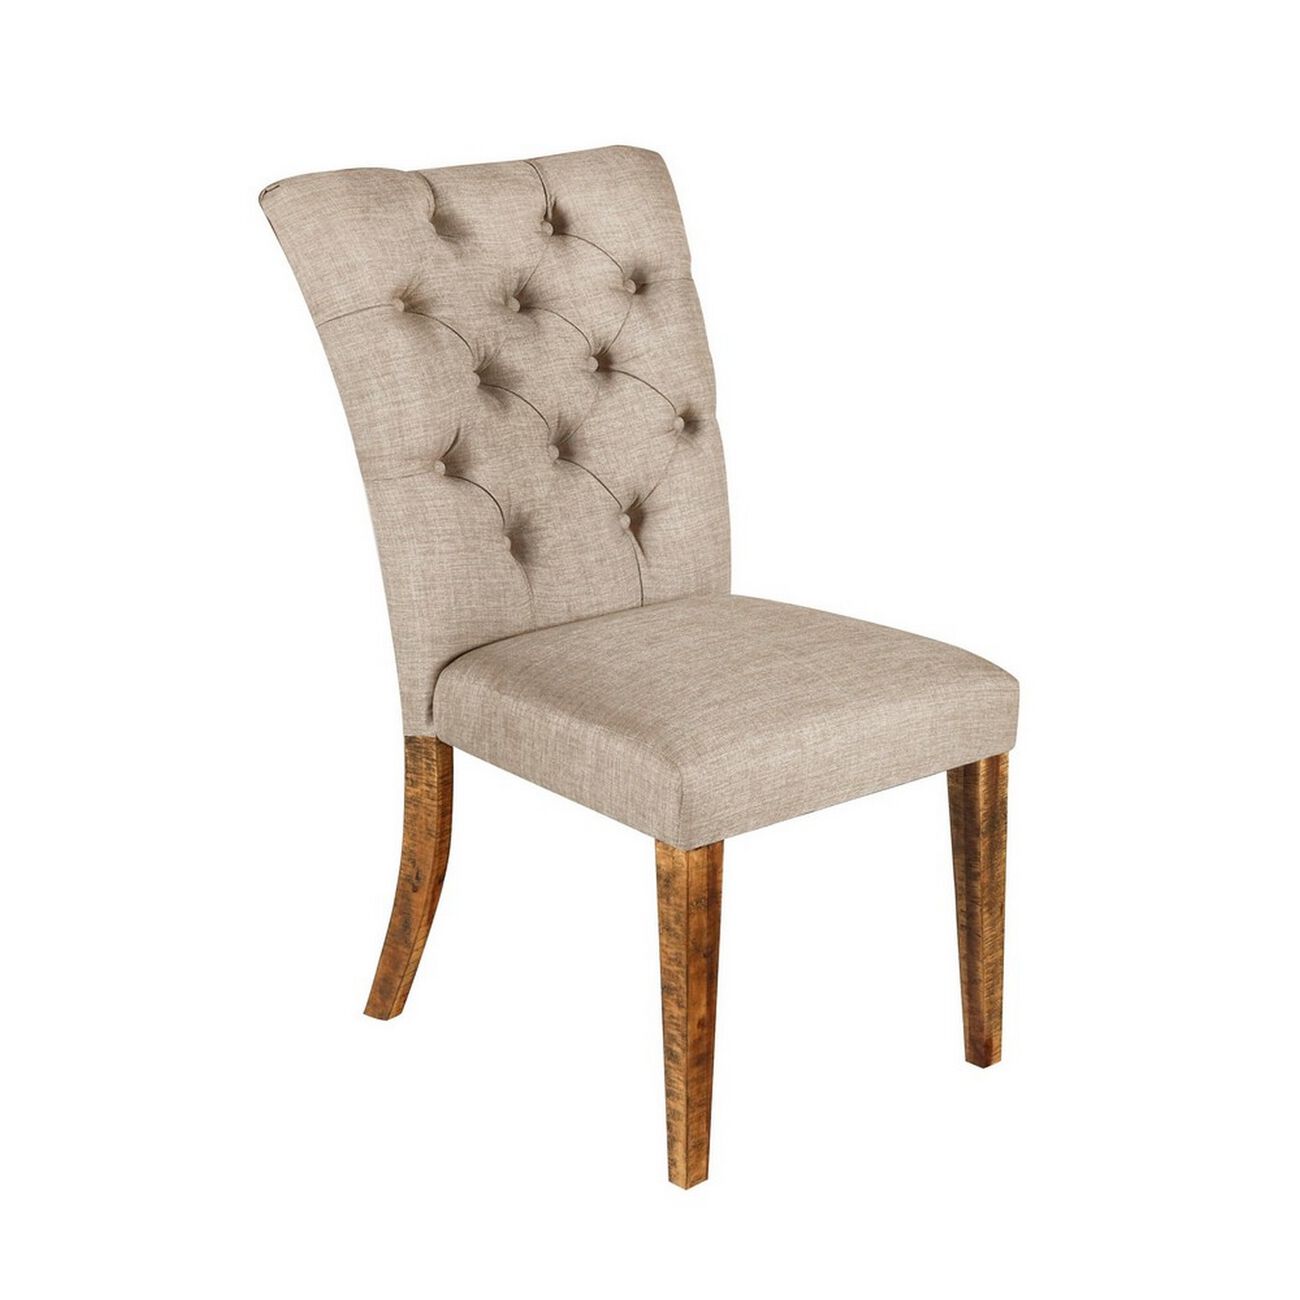 Fabric Upholstered Dining Chair with Button Tufted Backrest, Set of 2,Beige